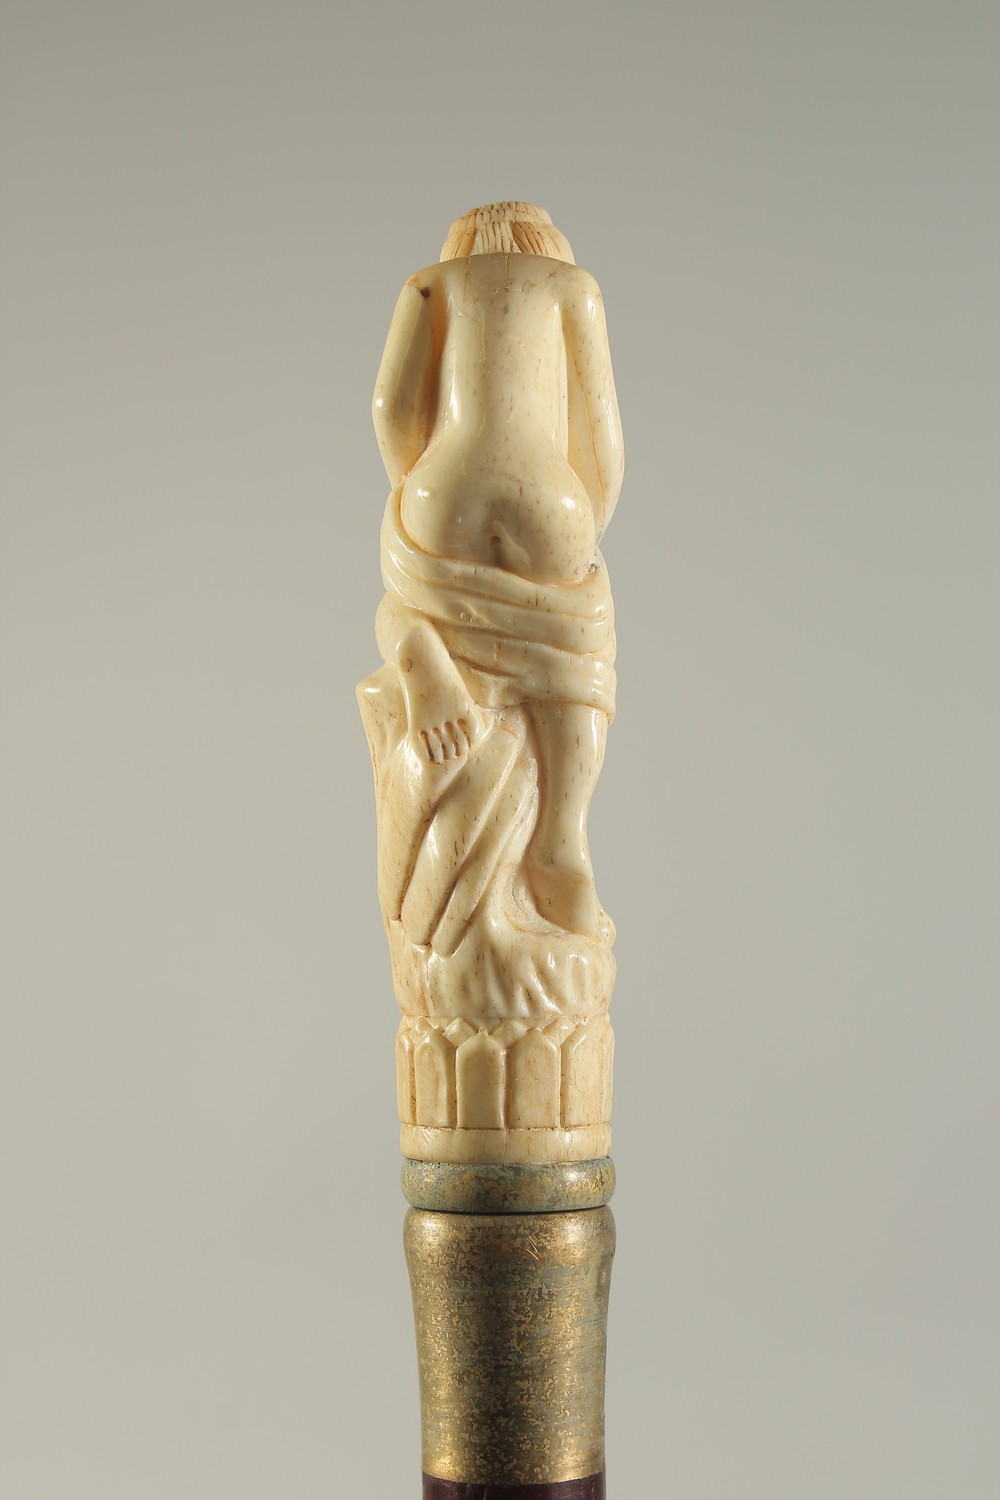 A CARVED BONE HANDLED WALKING STICK "SEMI-NUDE". - Image 3 of 3